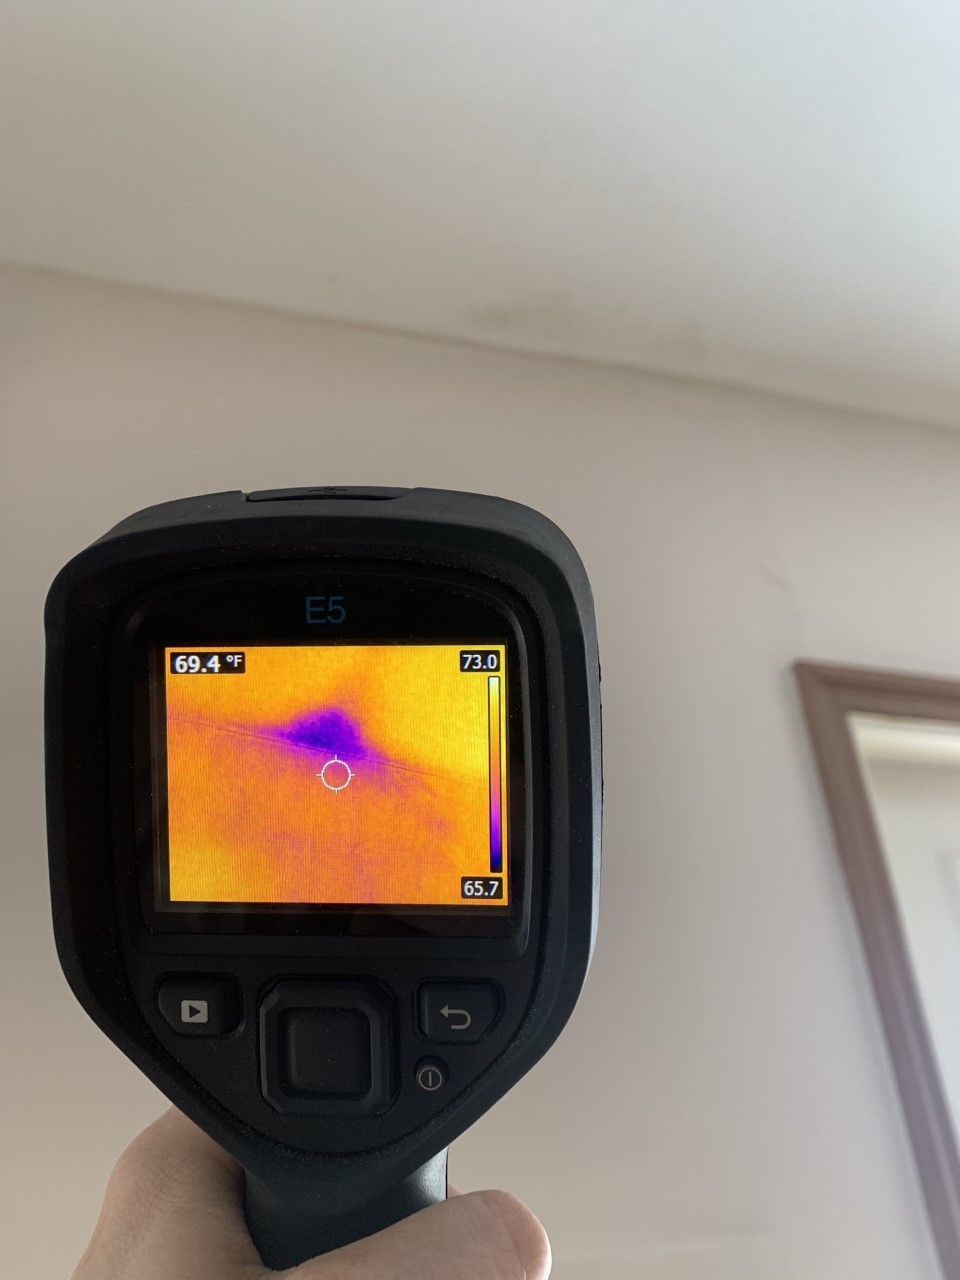 Detecting Leaks, Detecting water leaks, detecting water damage, thermography